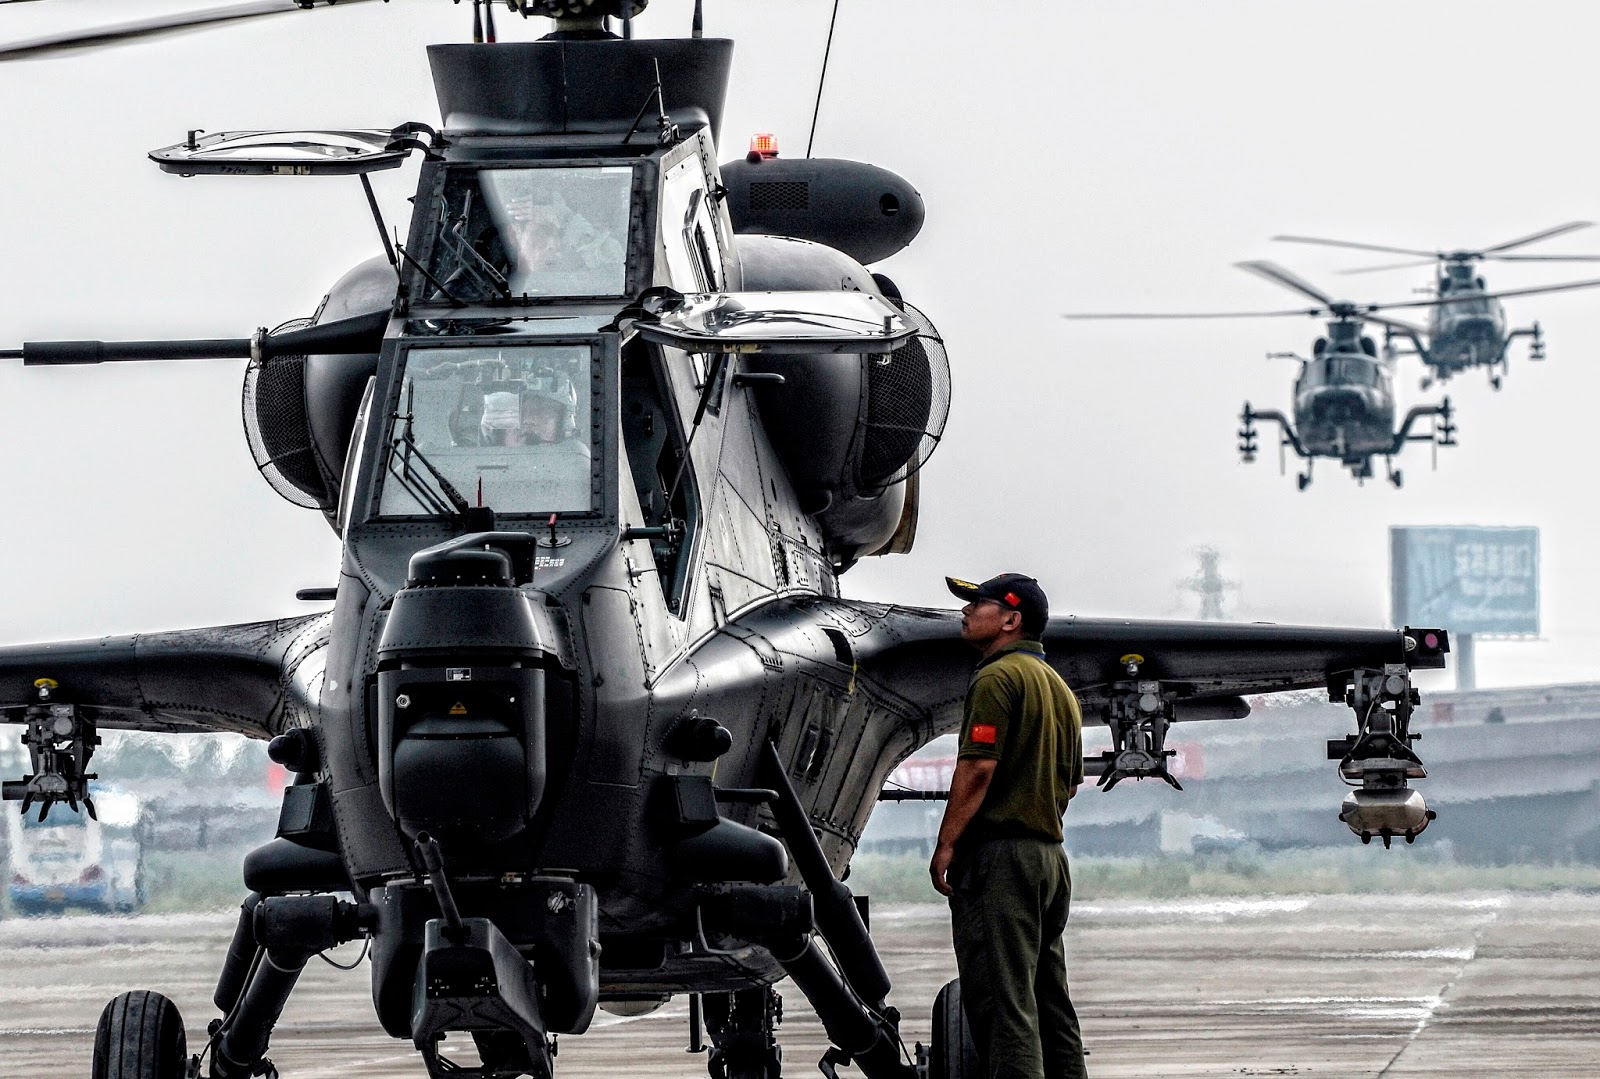 Best Attack Helicopter? - Page 2 Armed+Chinese+Z-10+Attack+Helicopter+gunship+PLA+Peoples+Liberation+Army+Air+Force+abcdefexport+pakitan+missile+hj10+atgm+rocket+wz-10+radaraam+++WZ-9+turboshaft+engine+firing+4th+5+6+7+8+9akd-10+navy+%25283%2529